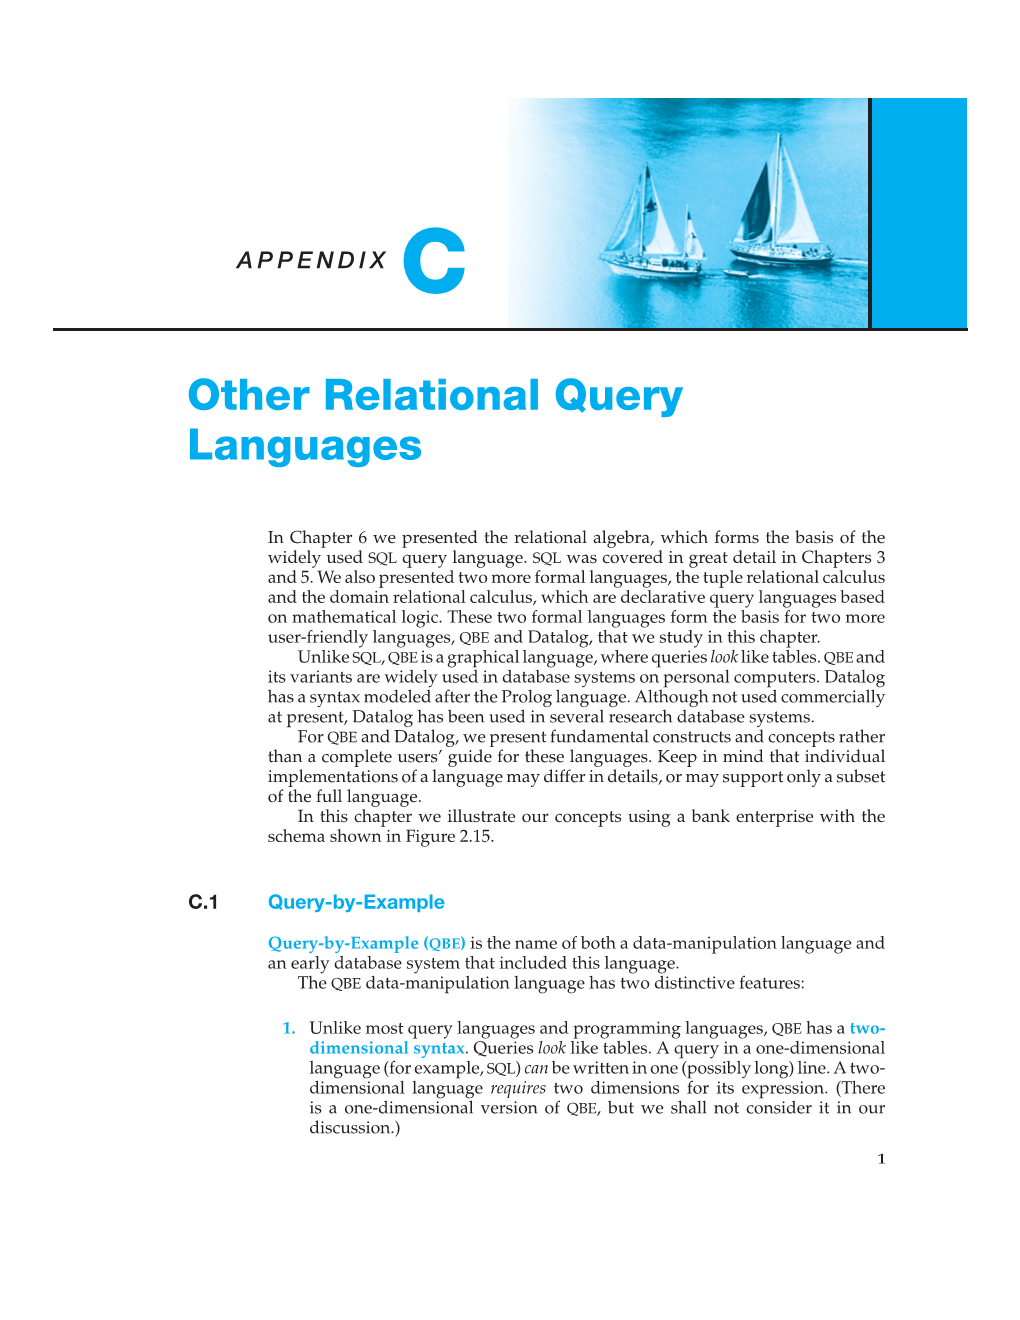 Other Relational Query Languages